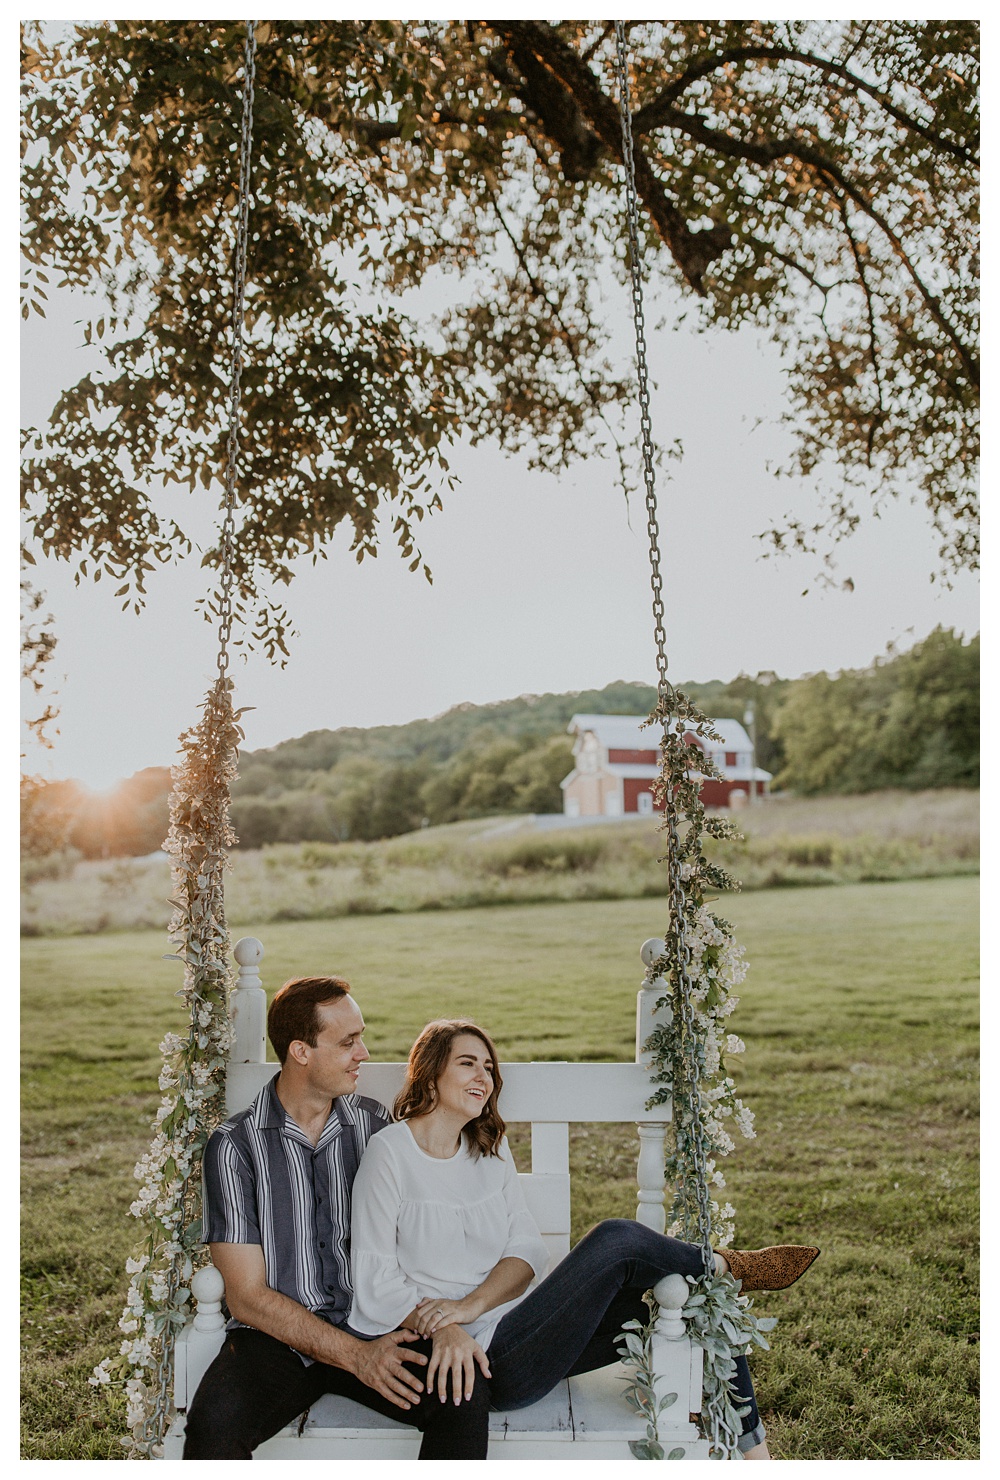 engaged couple on swing, Nashville Engagement Photographer, Nashville Wedding Photographer, Drakewood Farm, Nashville Wedding Venue, Tennessee Wedding, what to wear for engagement photos, best spots for engagement photos in Nashville, sunset engagement photos